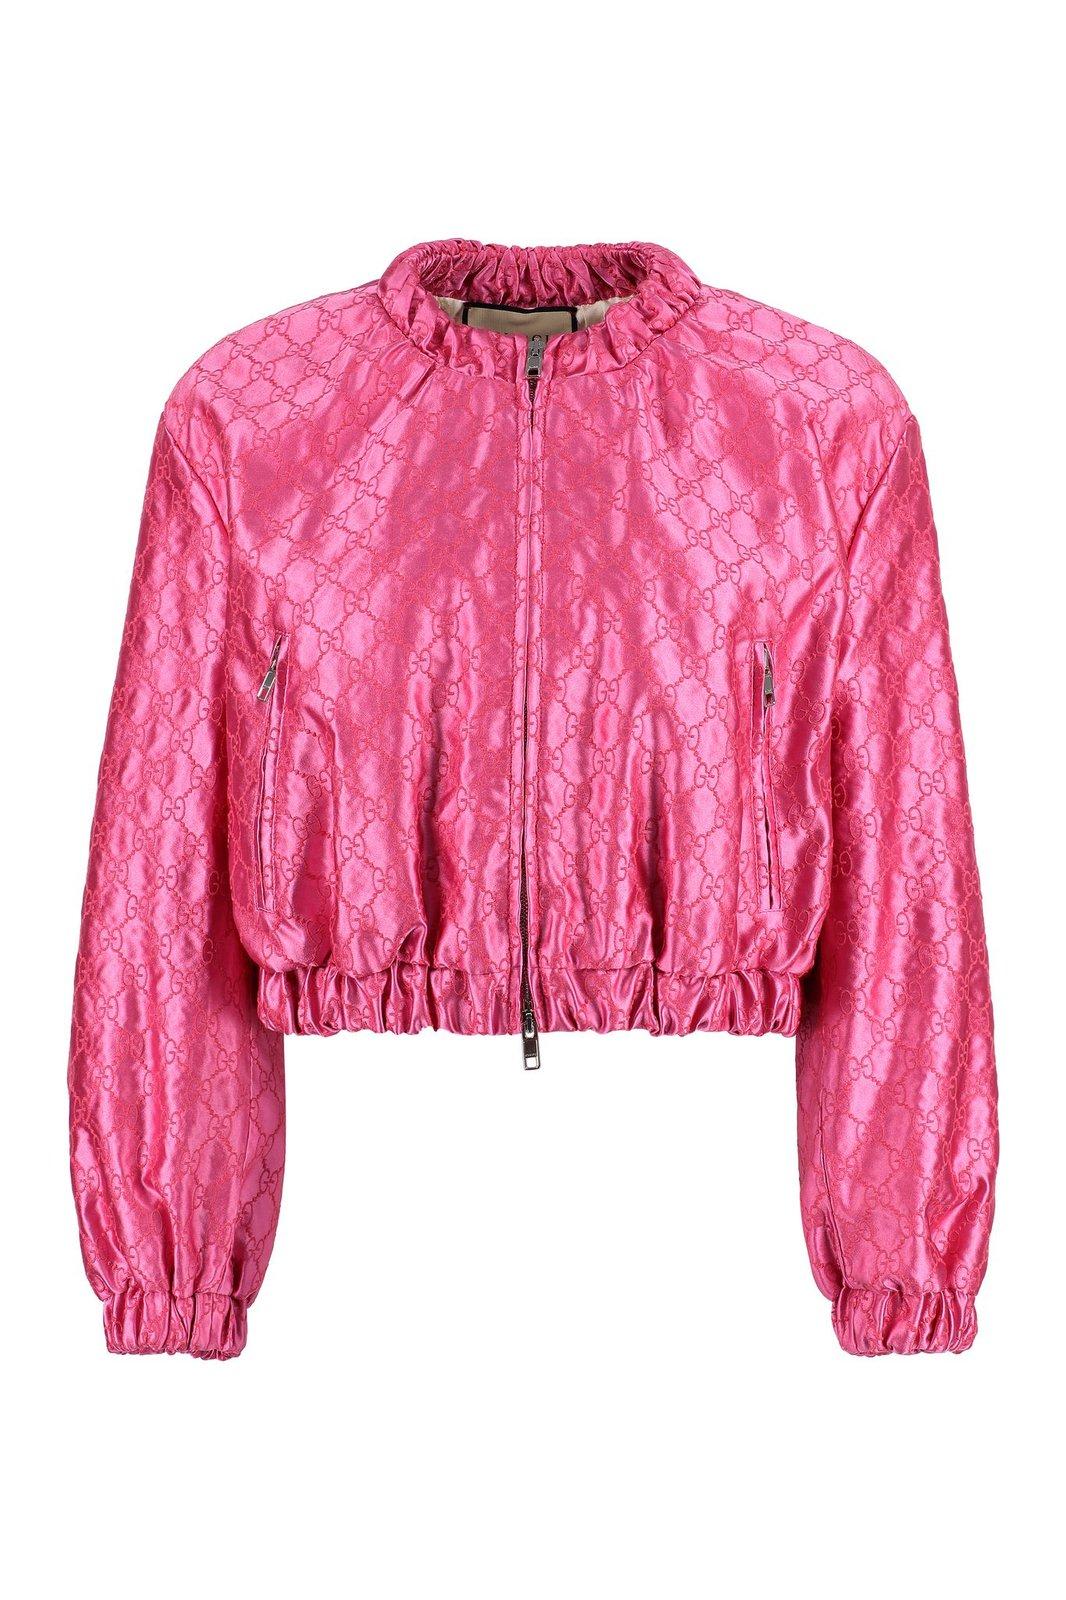 GUCCI ALL-OVER LOGO BOMBER JACKET